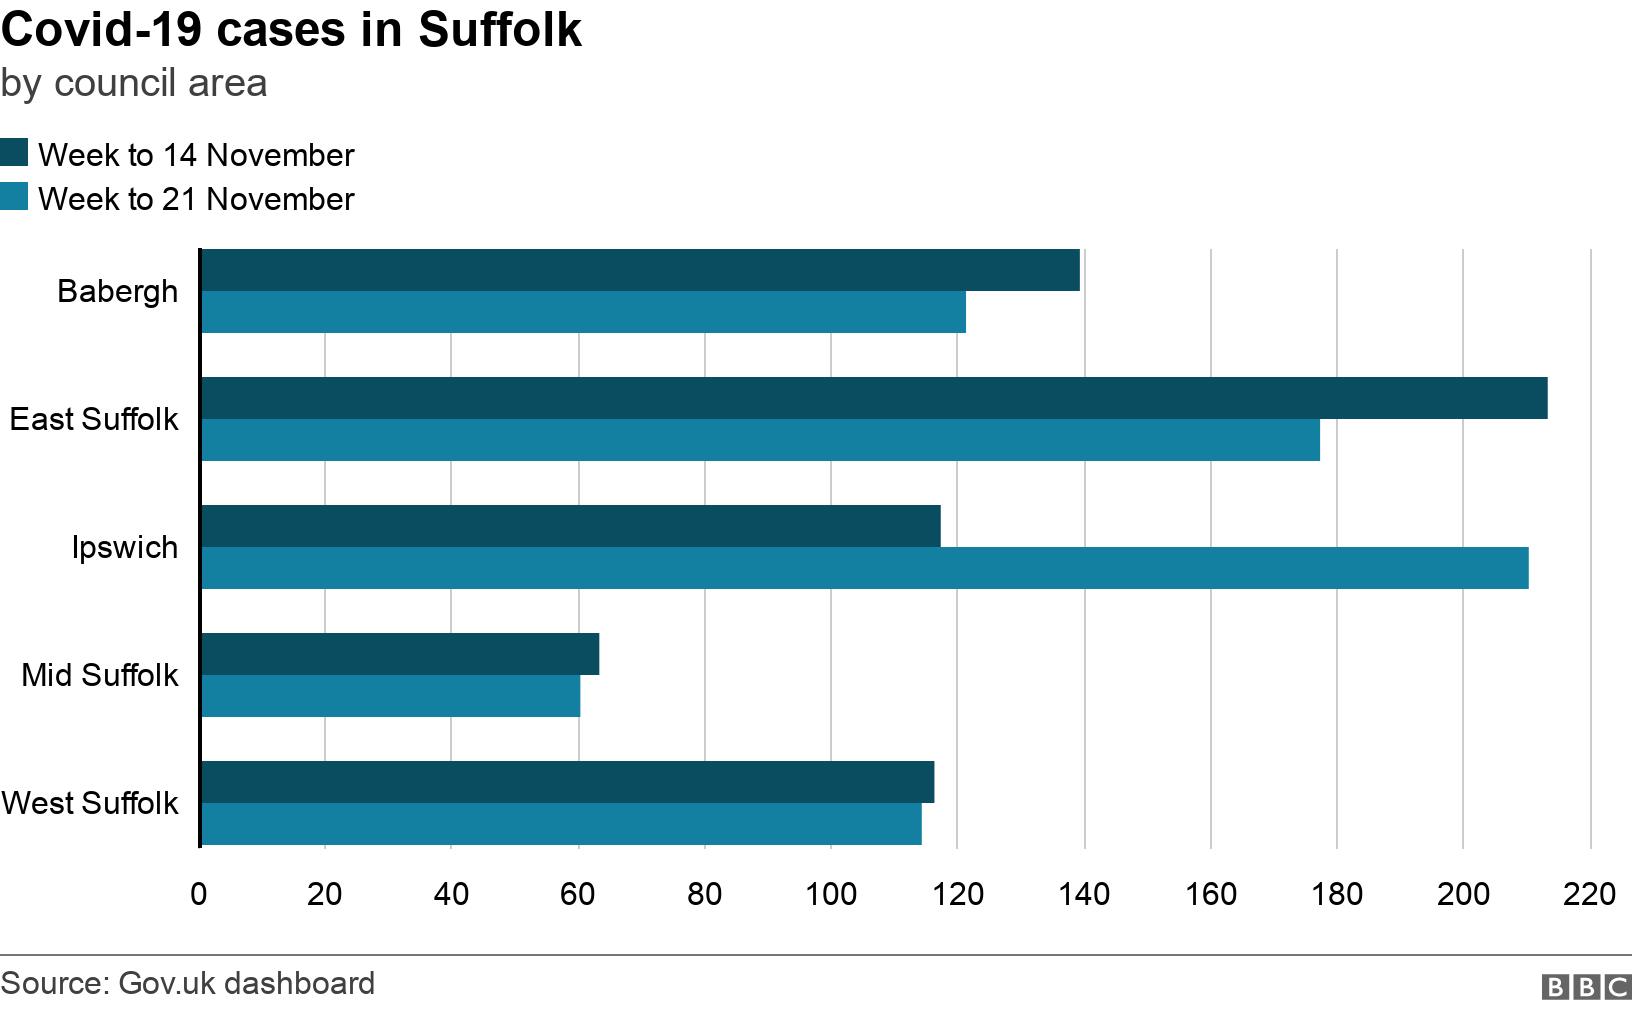 Covid-19 cases in Suffolk. by council area. Cases of Covid-19 in Suffolk by council area in week to 21 November .